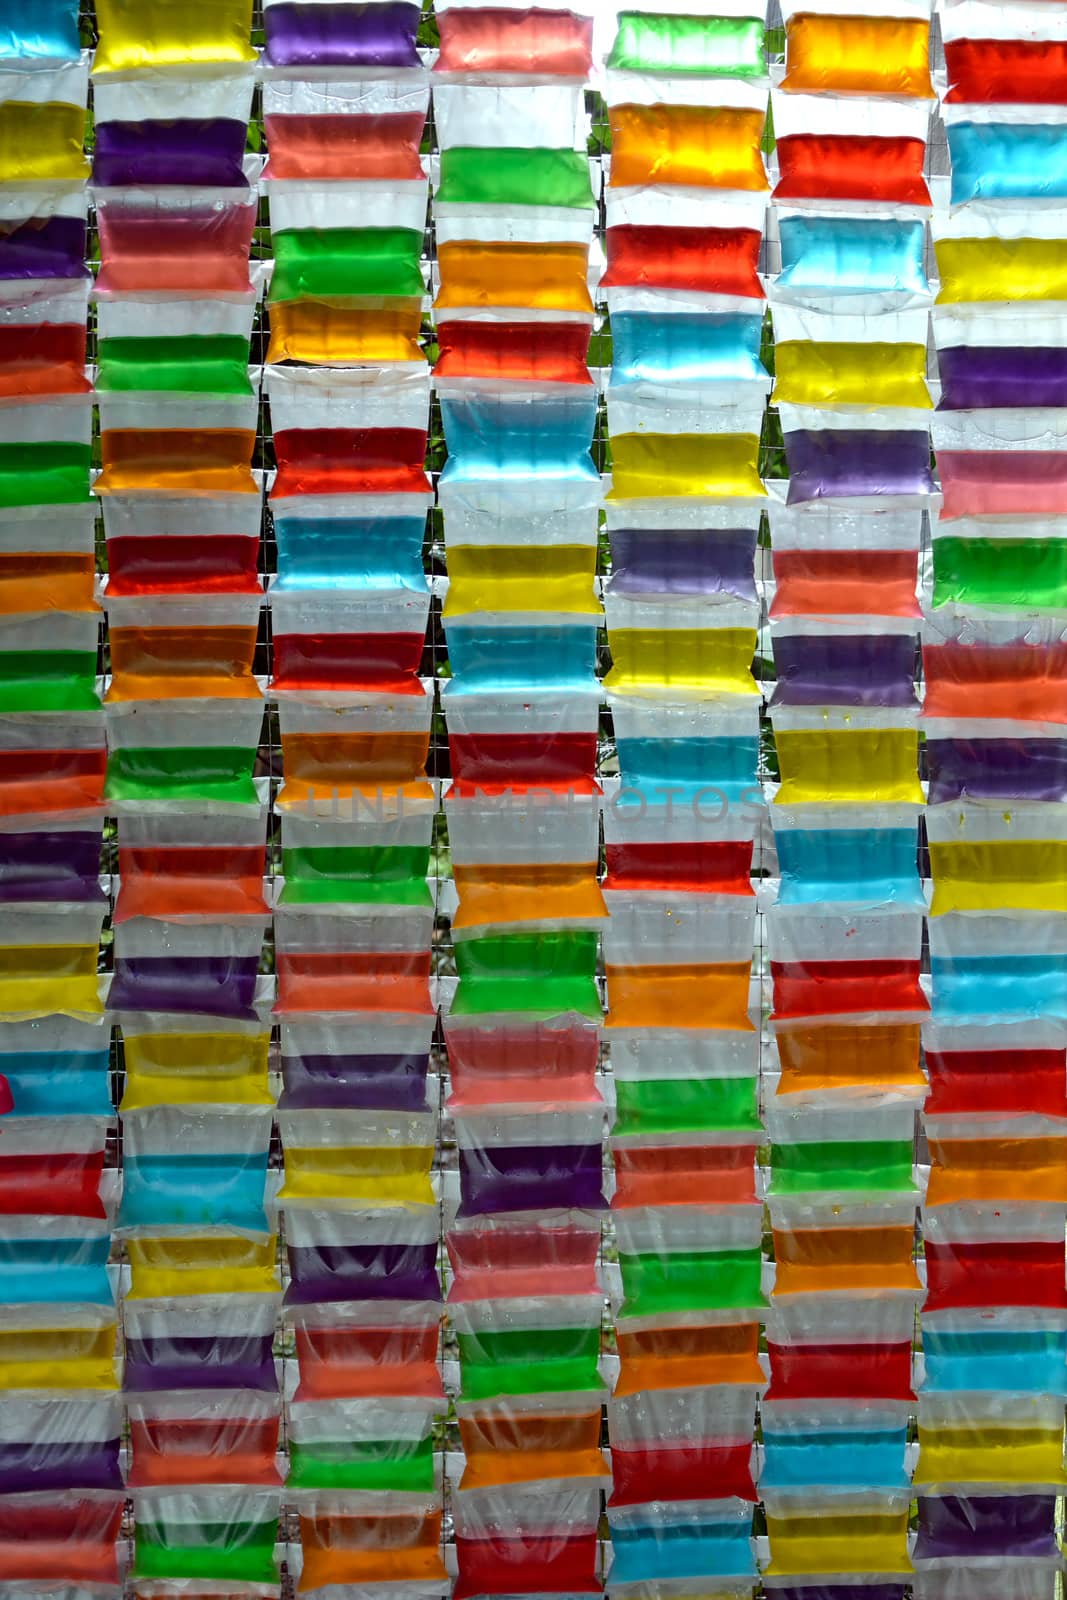 used plastic colorful bags decorated by think4photop